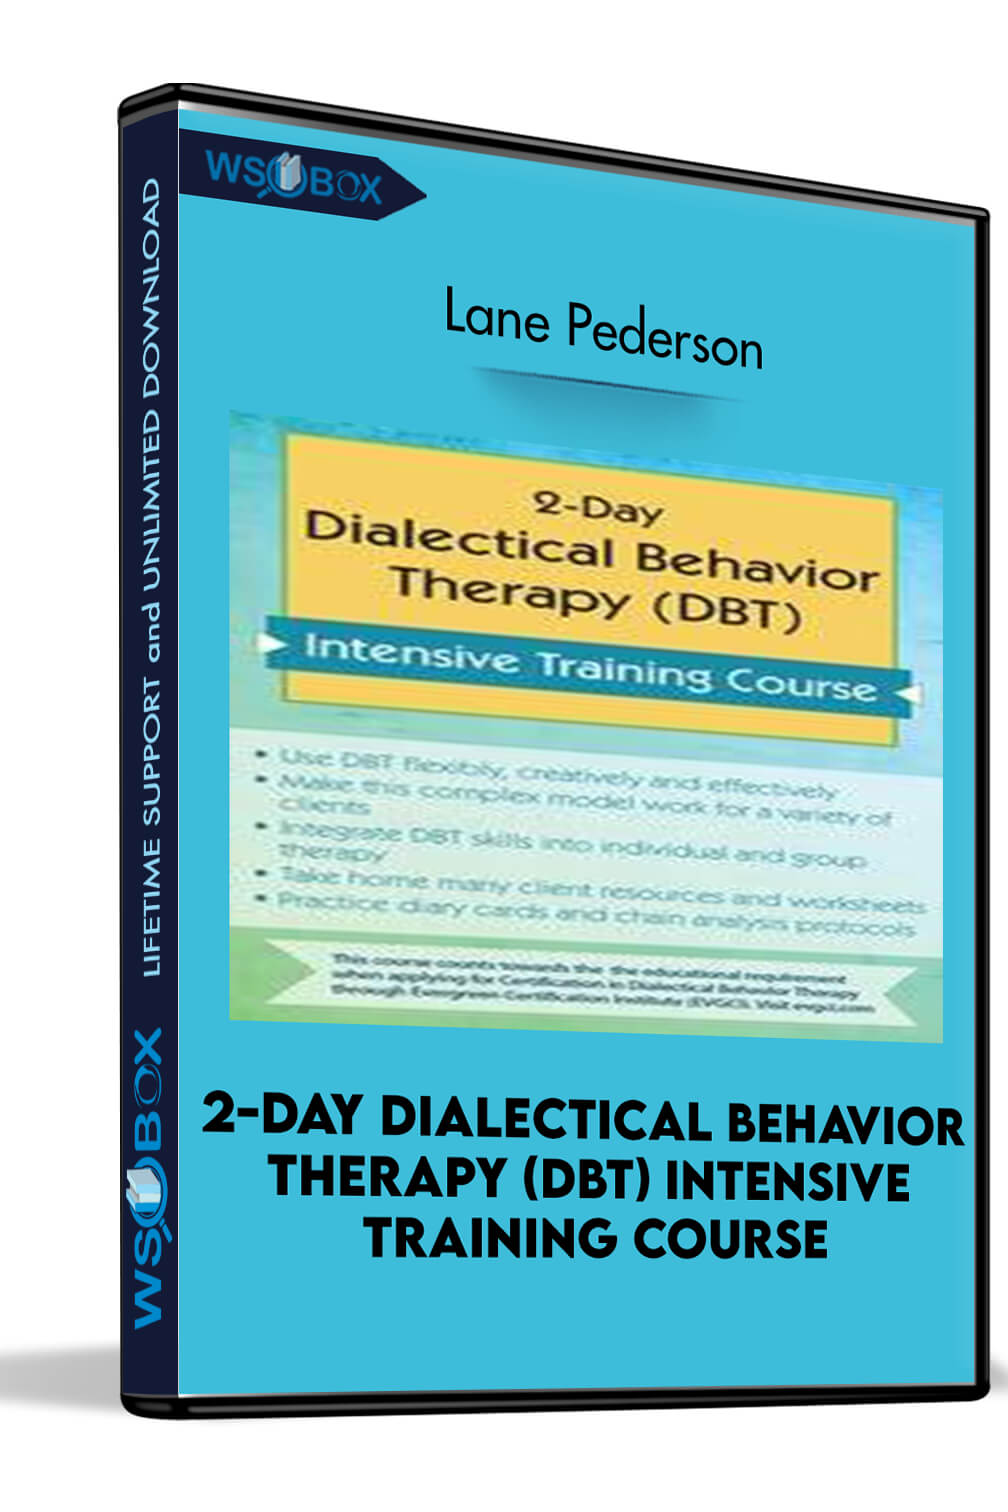 2-Day Dialectical Behavior Therapy (DBT) Intensive Training Course - Lane Pederson